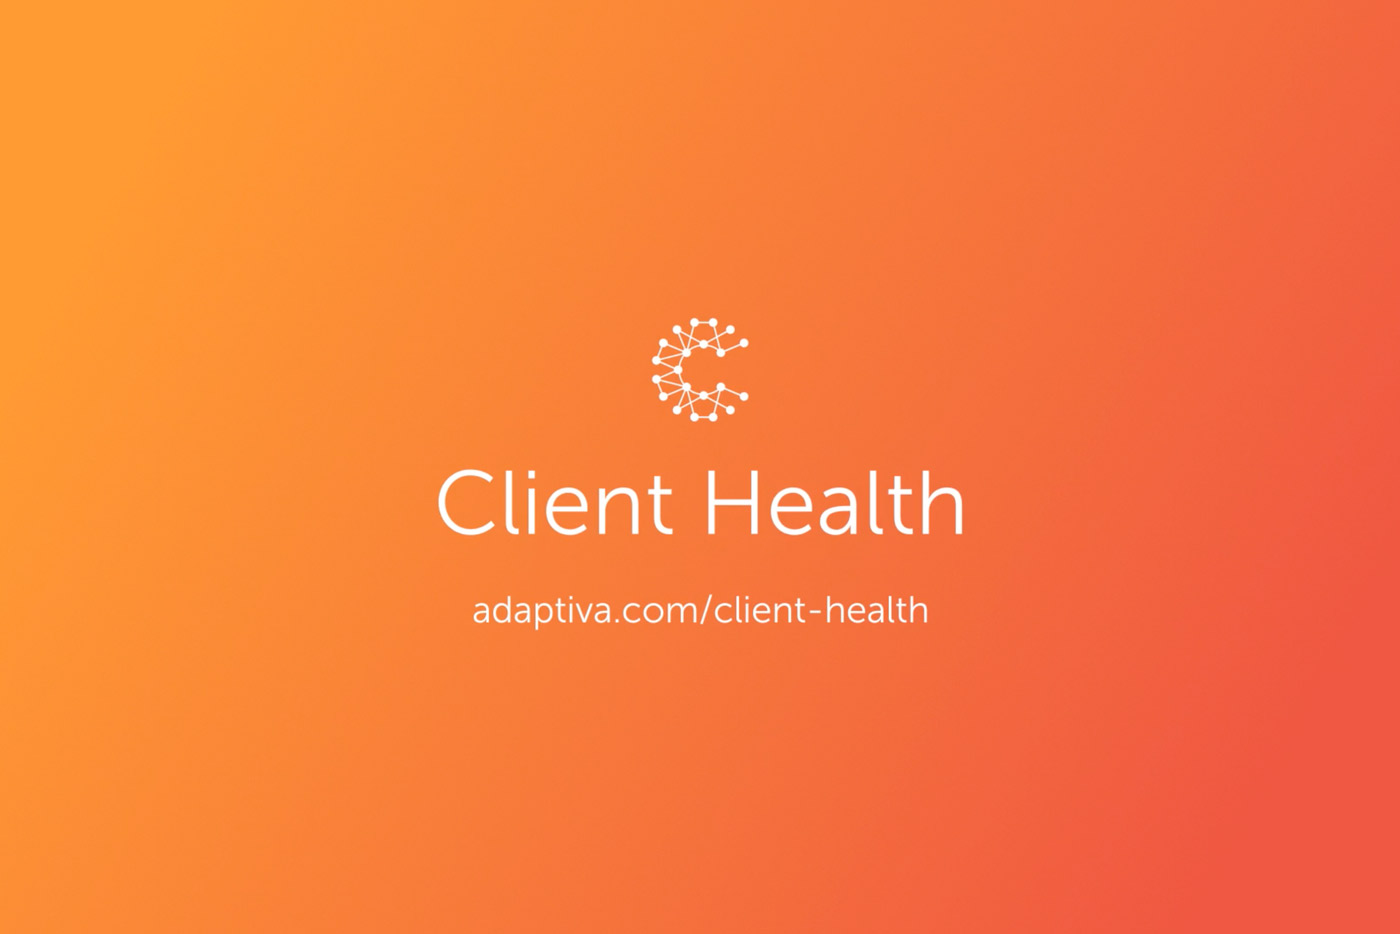 Client Health Product Video